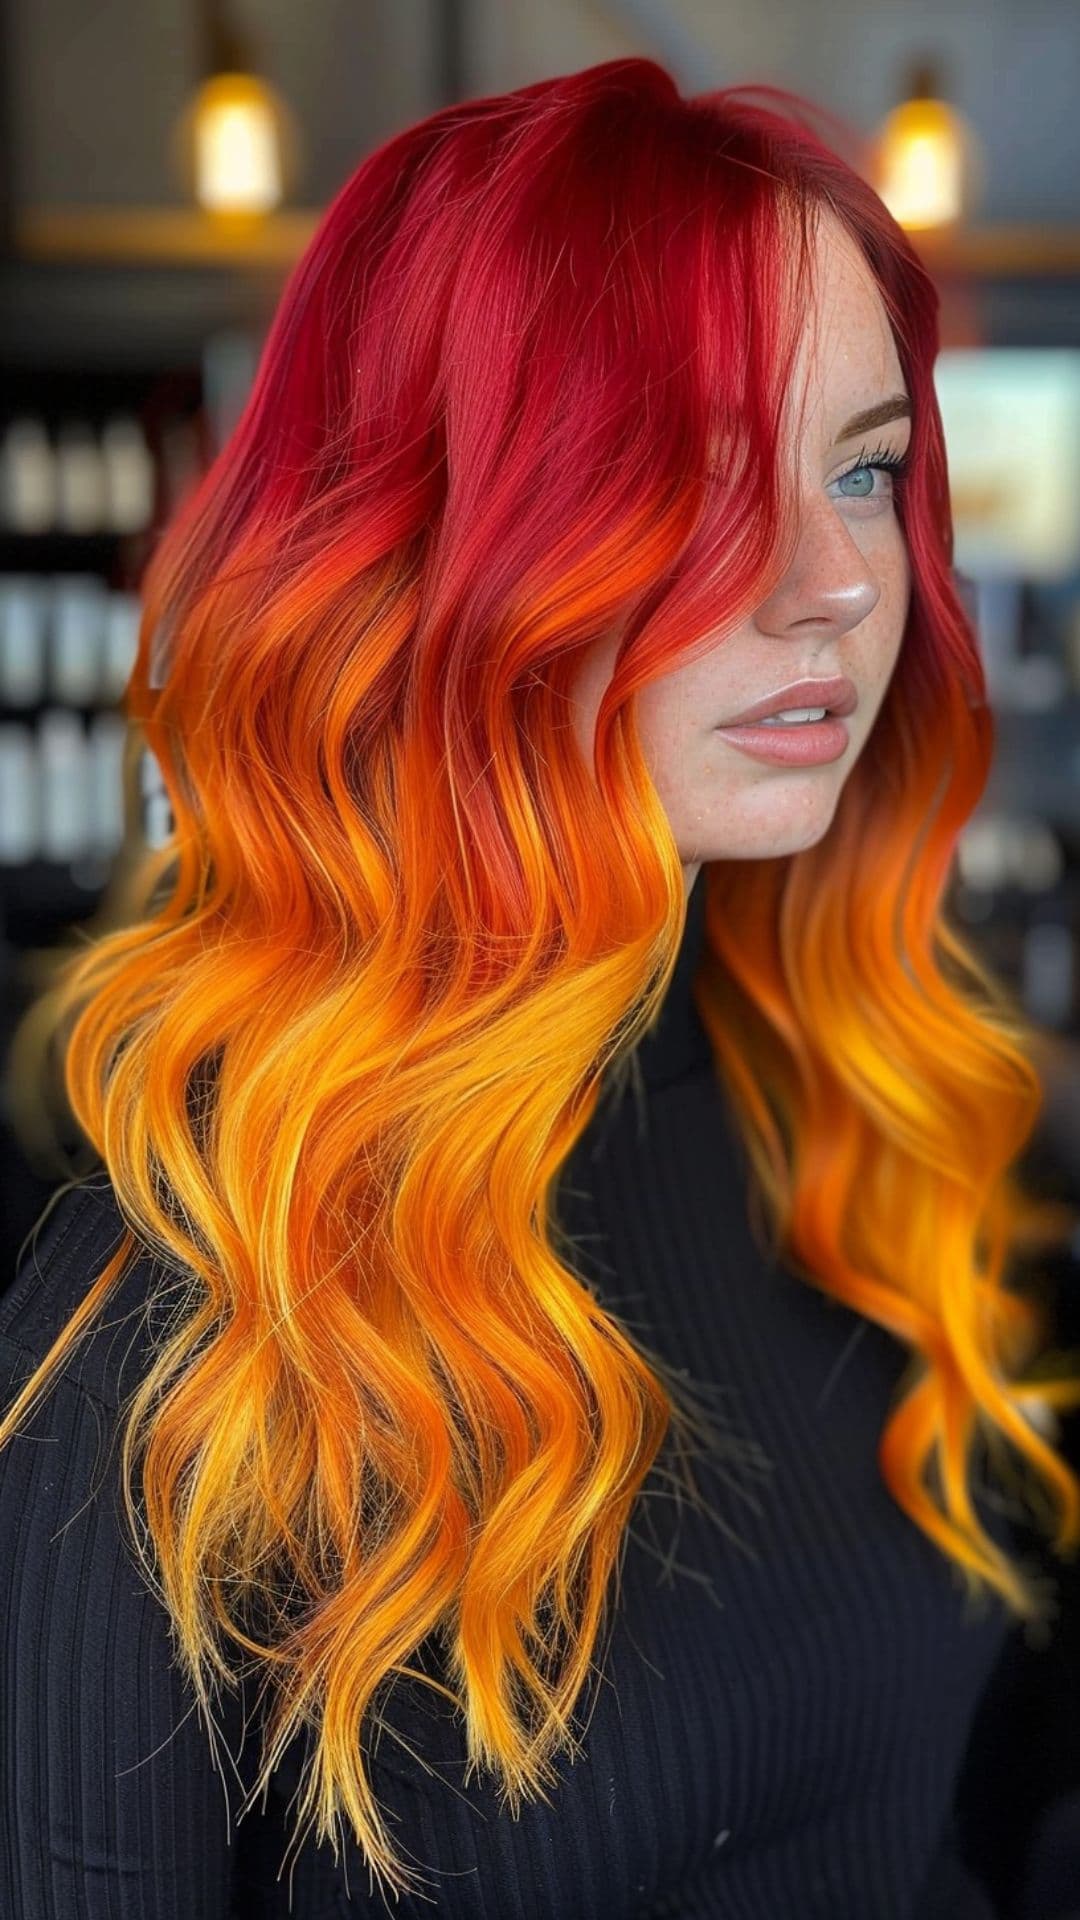 A woman modelling a red and orange hair.